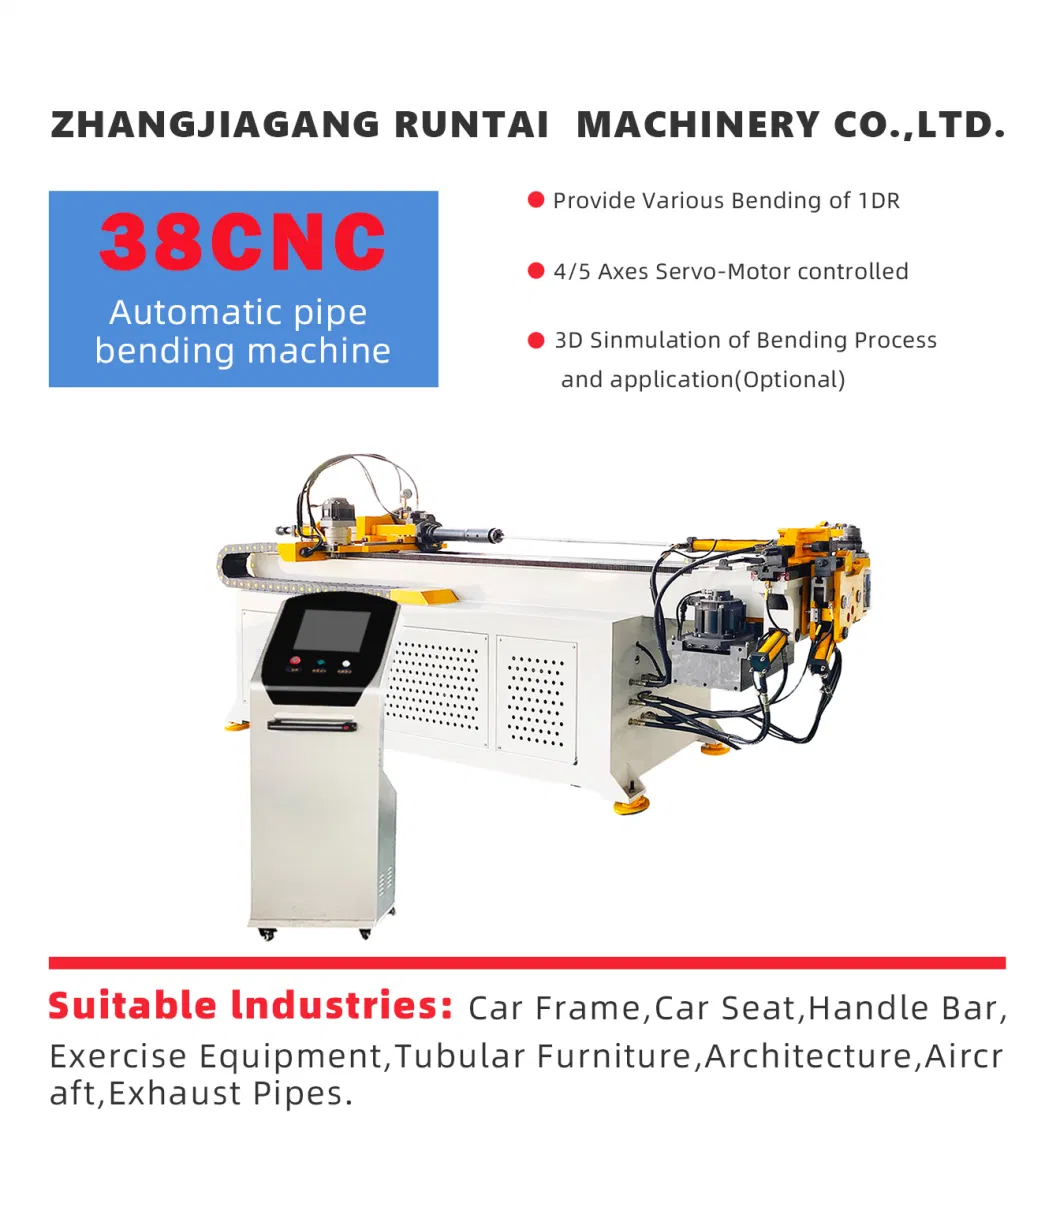 Manufacture Sells Rt38CNC Buy 3 Axis 3D Tube Bender CNC Nc Manual Automatic Servo Metal Exhaust Ss Rolling Hydraulic Pipe Bending Machine Price